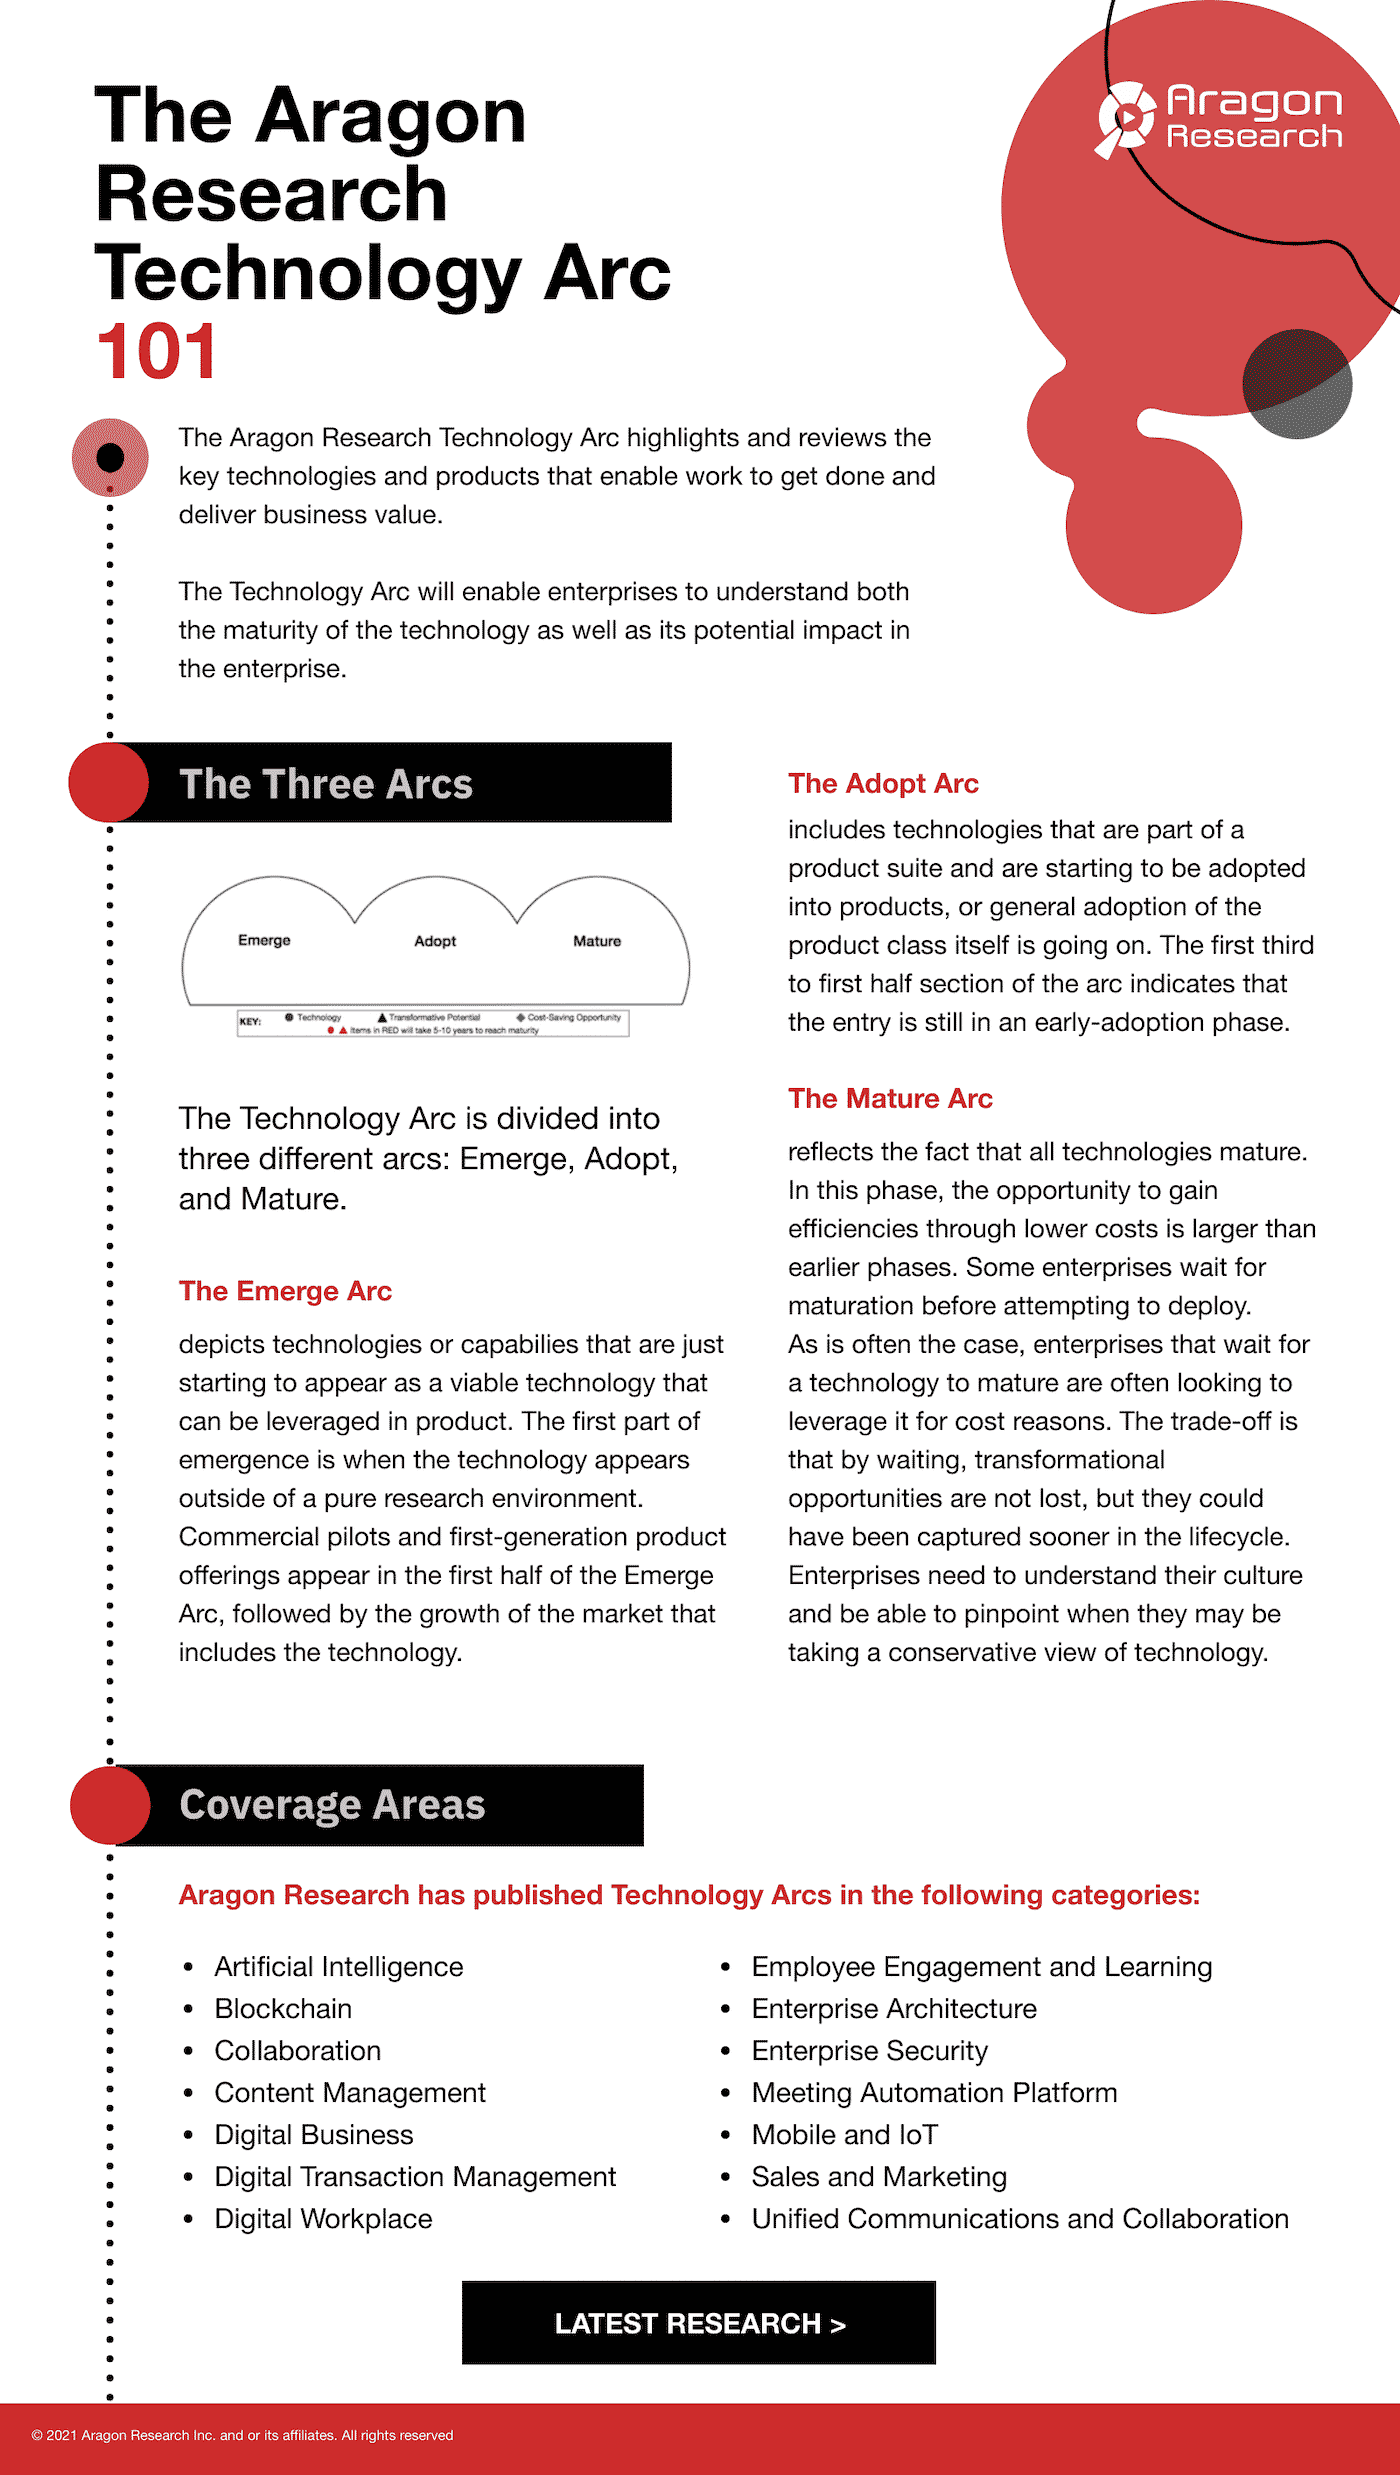 [Infographic] The Aragon Research Technology Arc 101